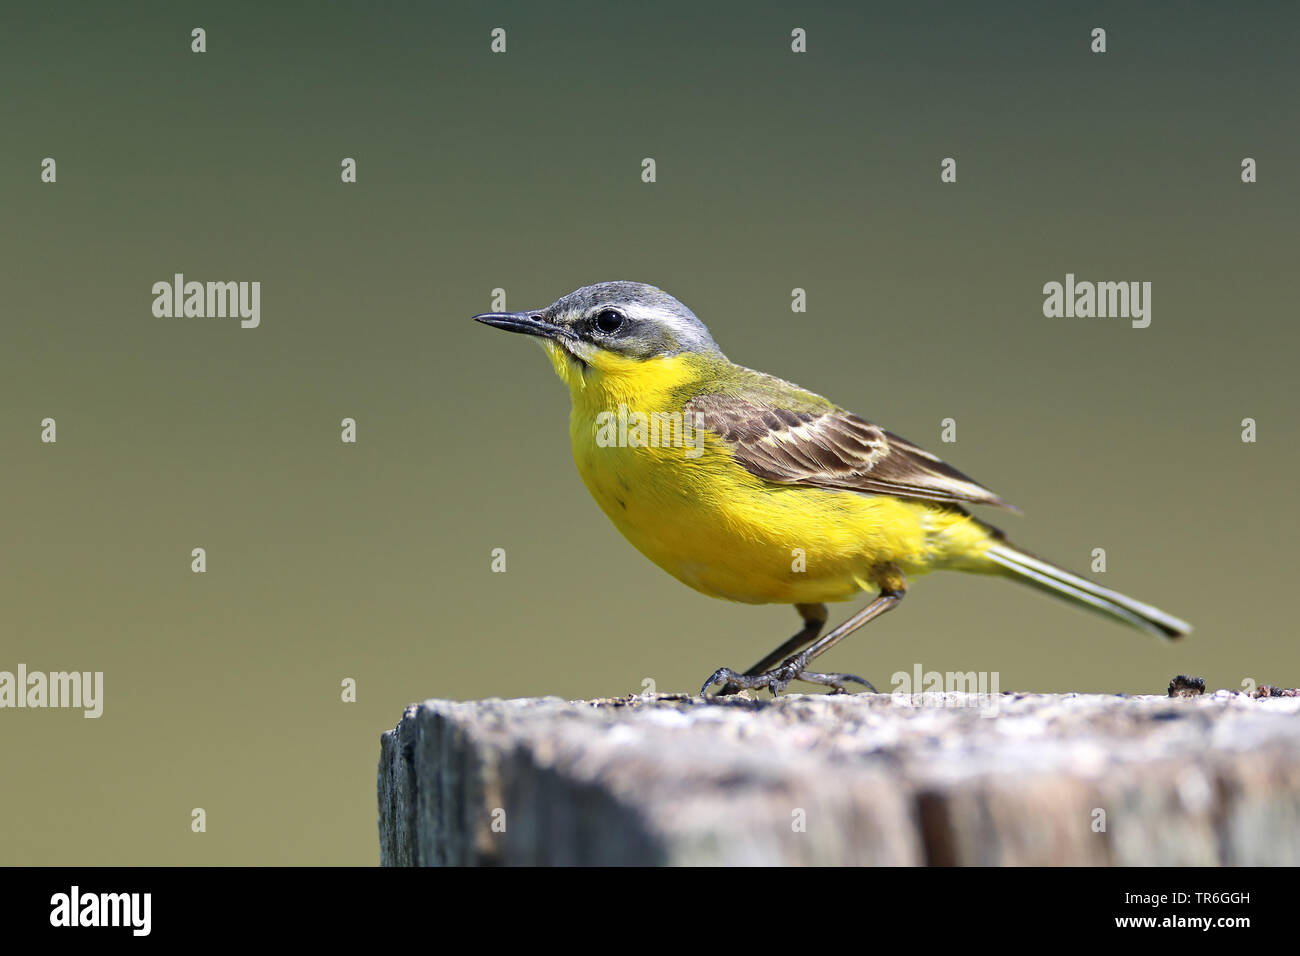 Yellow wagtail (Motacilla flava), male on a wooden post, Netherlands, Groningen Stock Photo